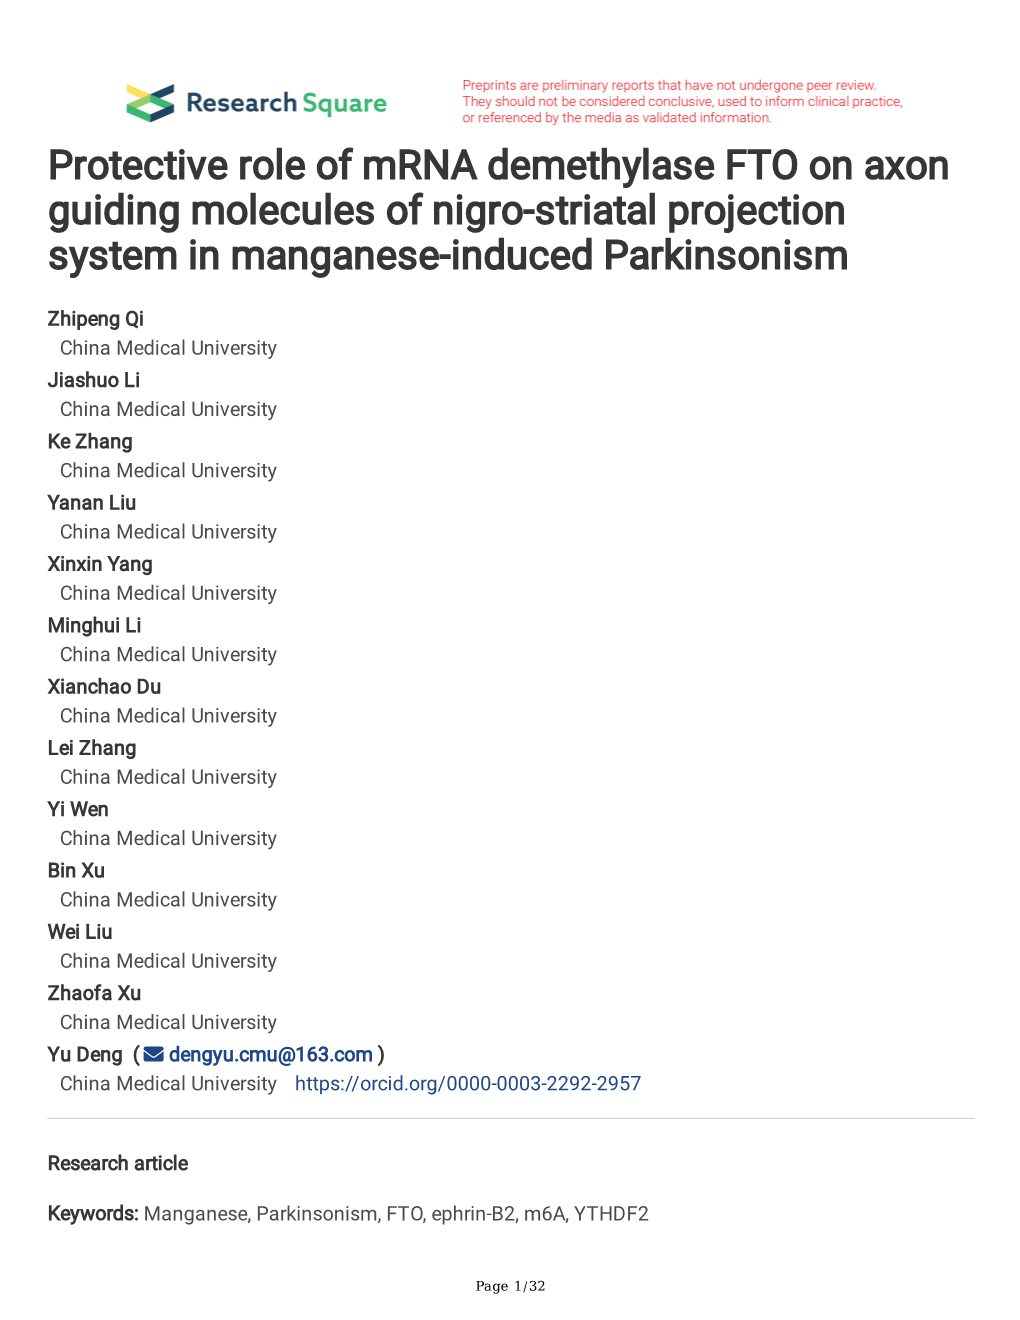 Protective Role of Mrna Demethylase FTO on Axon Guiding Molecules of Nigro-Striatal Projection System in Manganese-Induced Parkinsonism